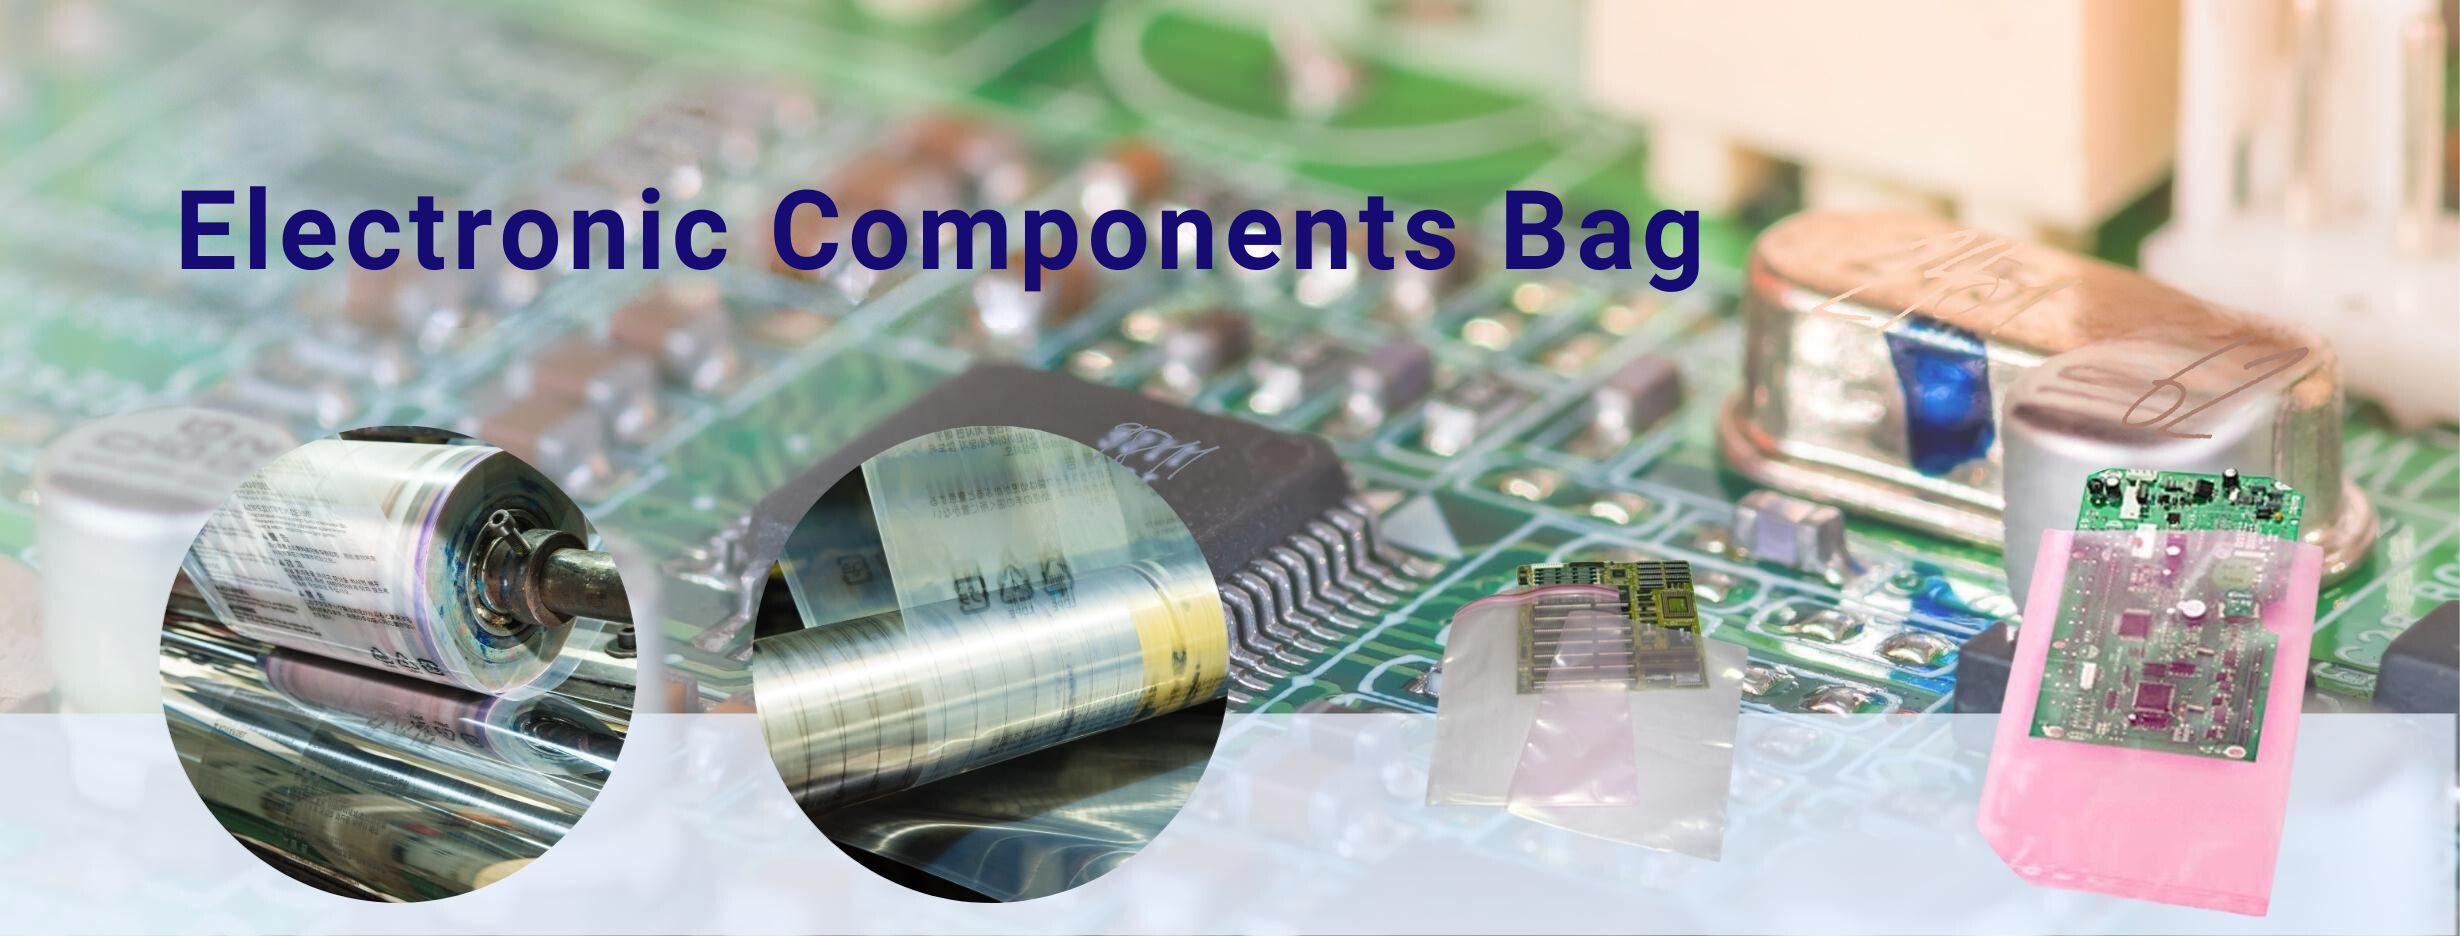 Electronic Components Bag